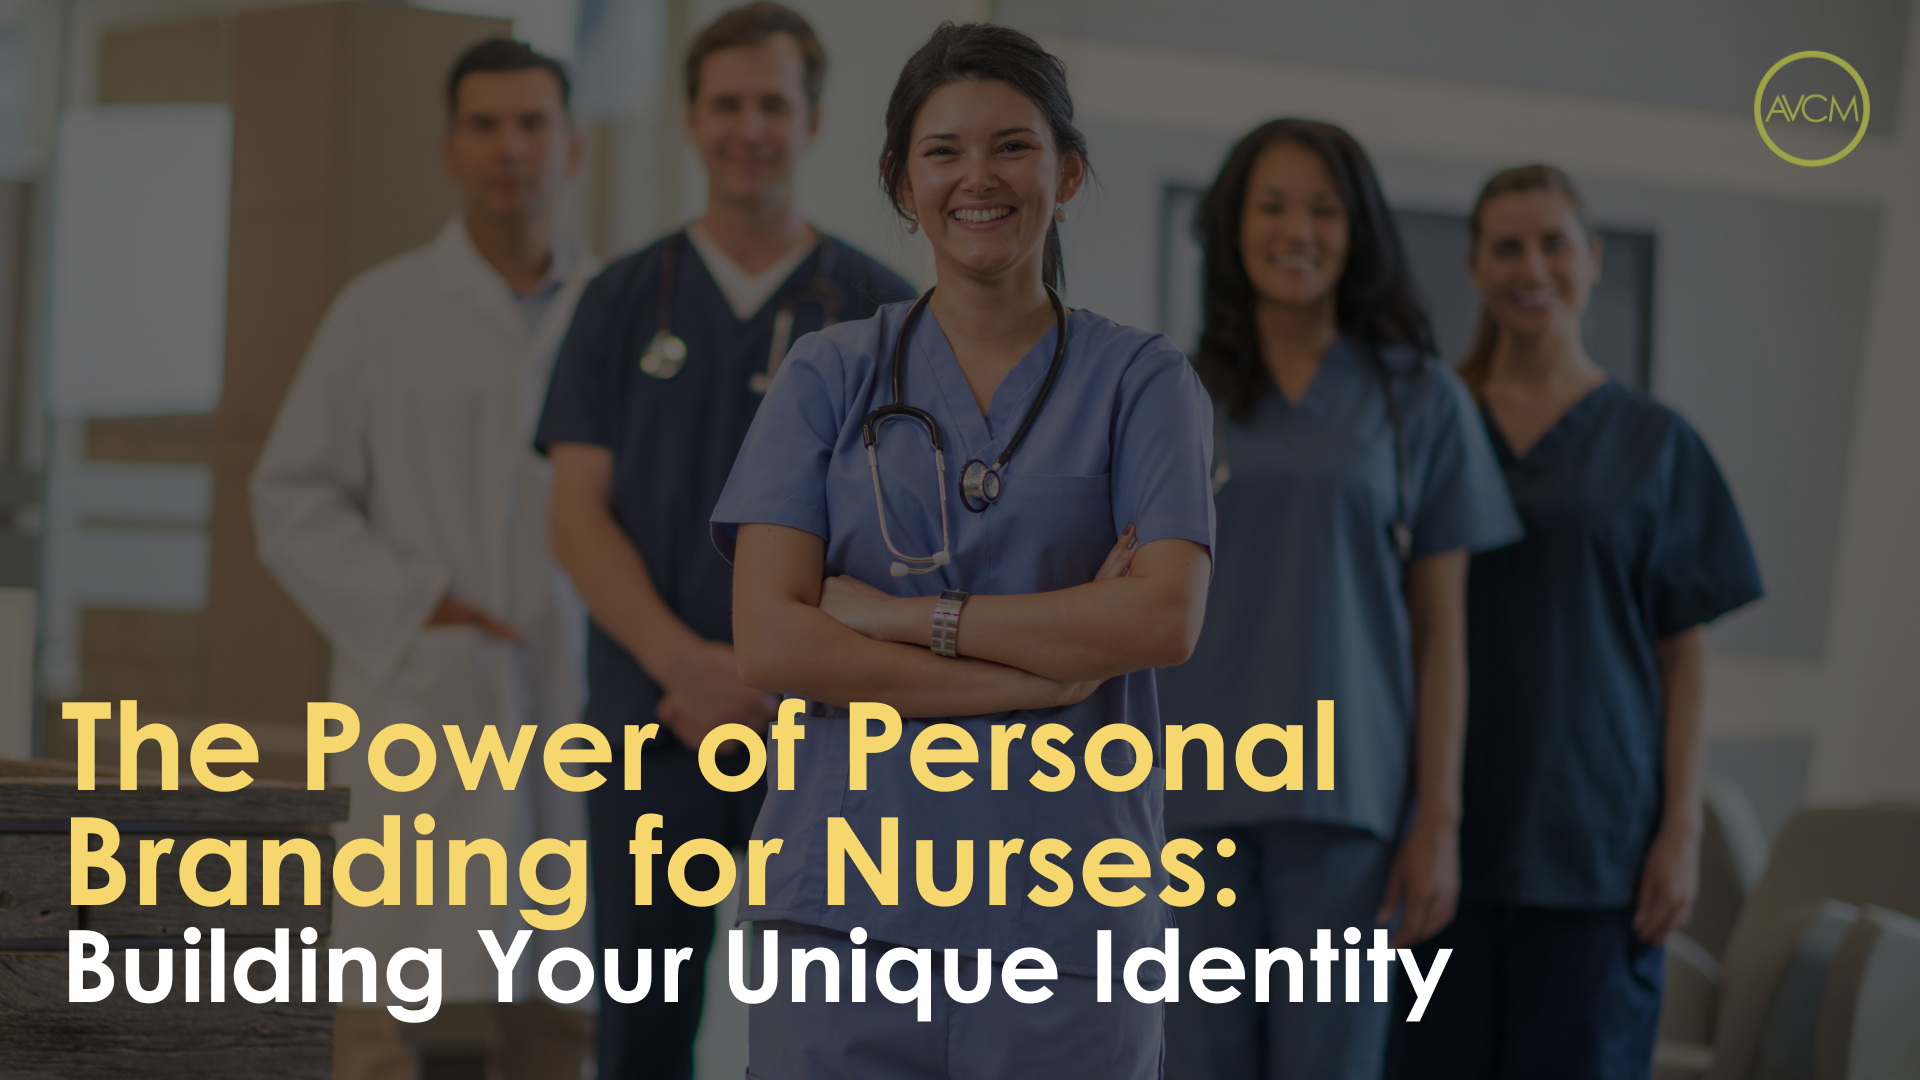 BB COVER 2 - Building Your Unique Identity: The Power of Personal Branding for Nurses